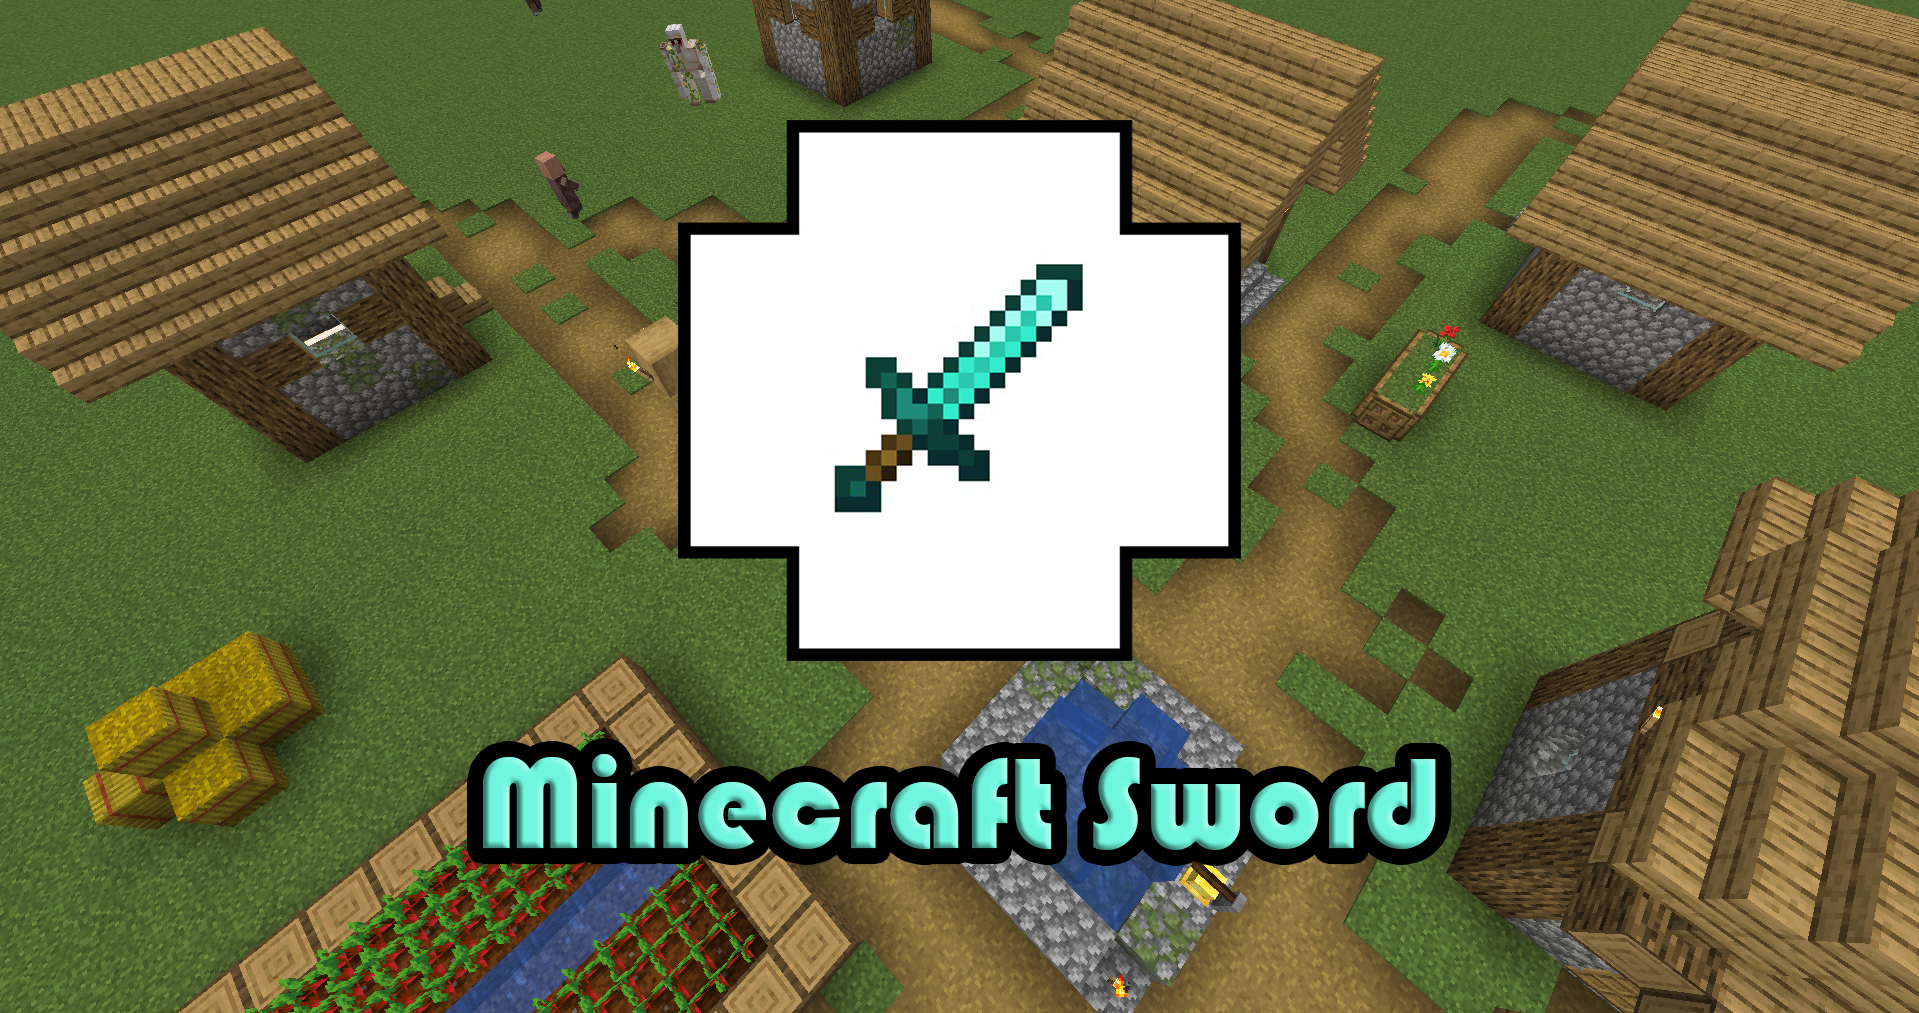 How To Use A Sword in Minecraft